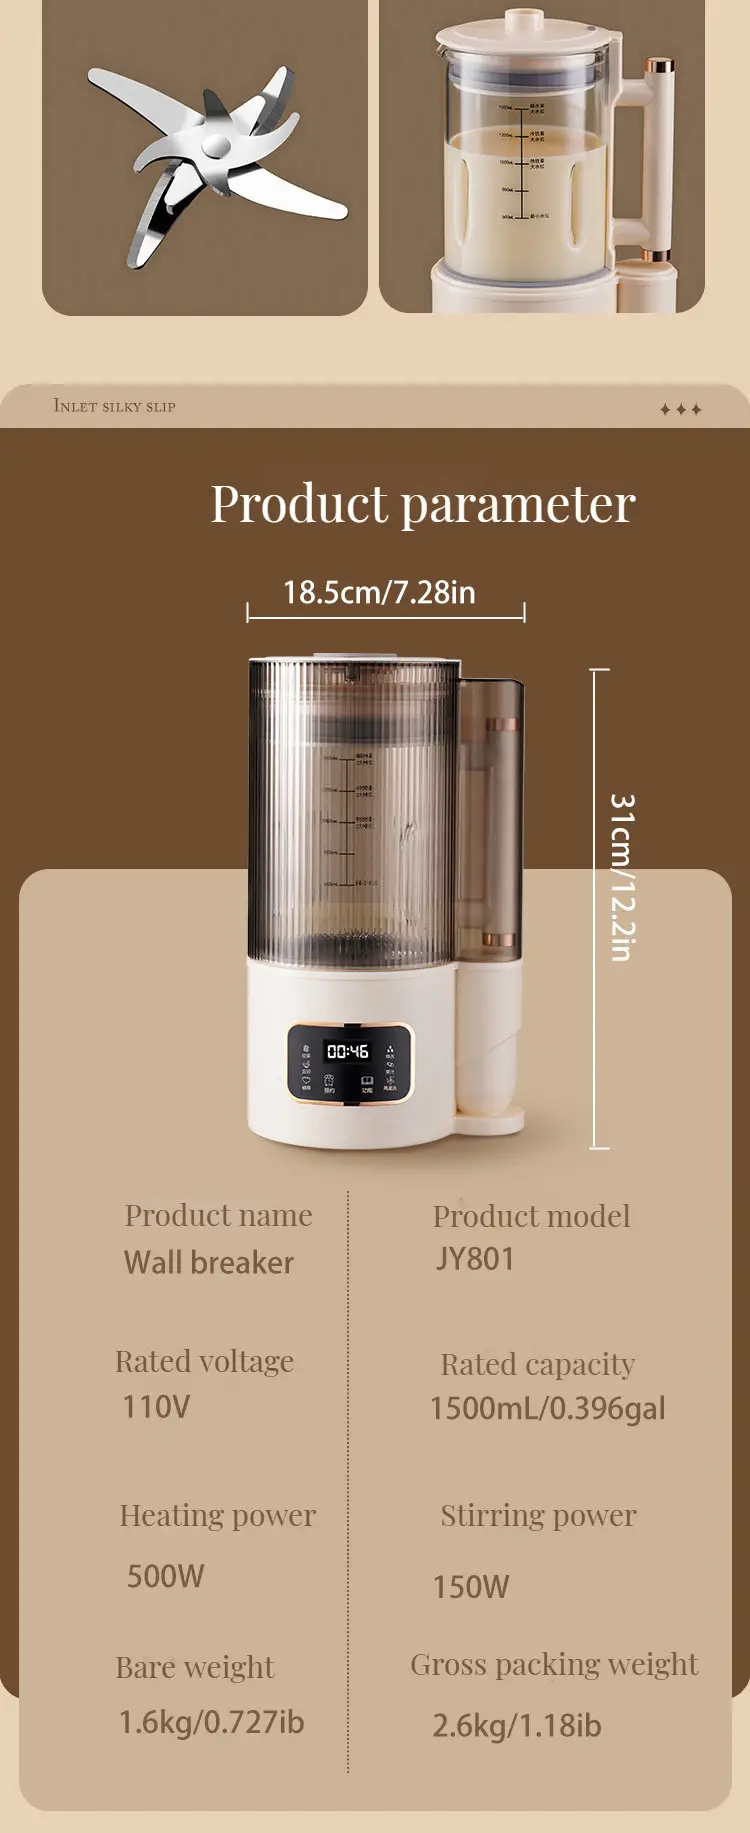 a bass wall breaker that can make a smoothie and a high boron glass cup for household heating automatic small soy milk machine food supplement machine silent soft sound multi functional blender with sound insulation cover details 12